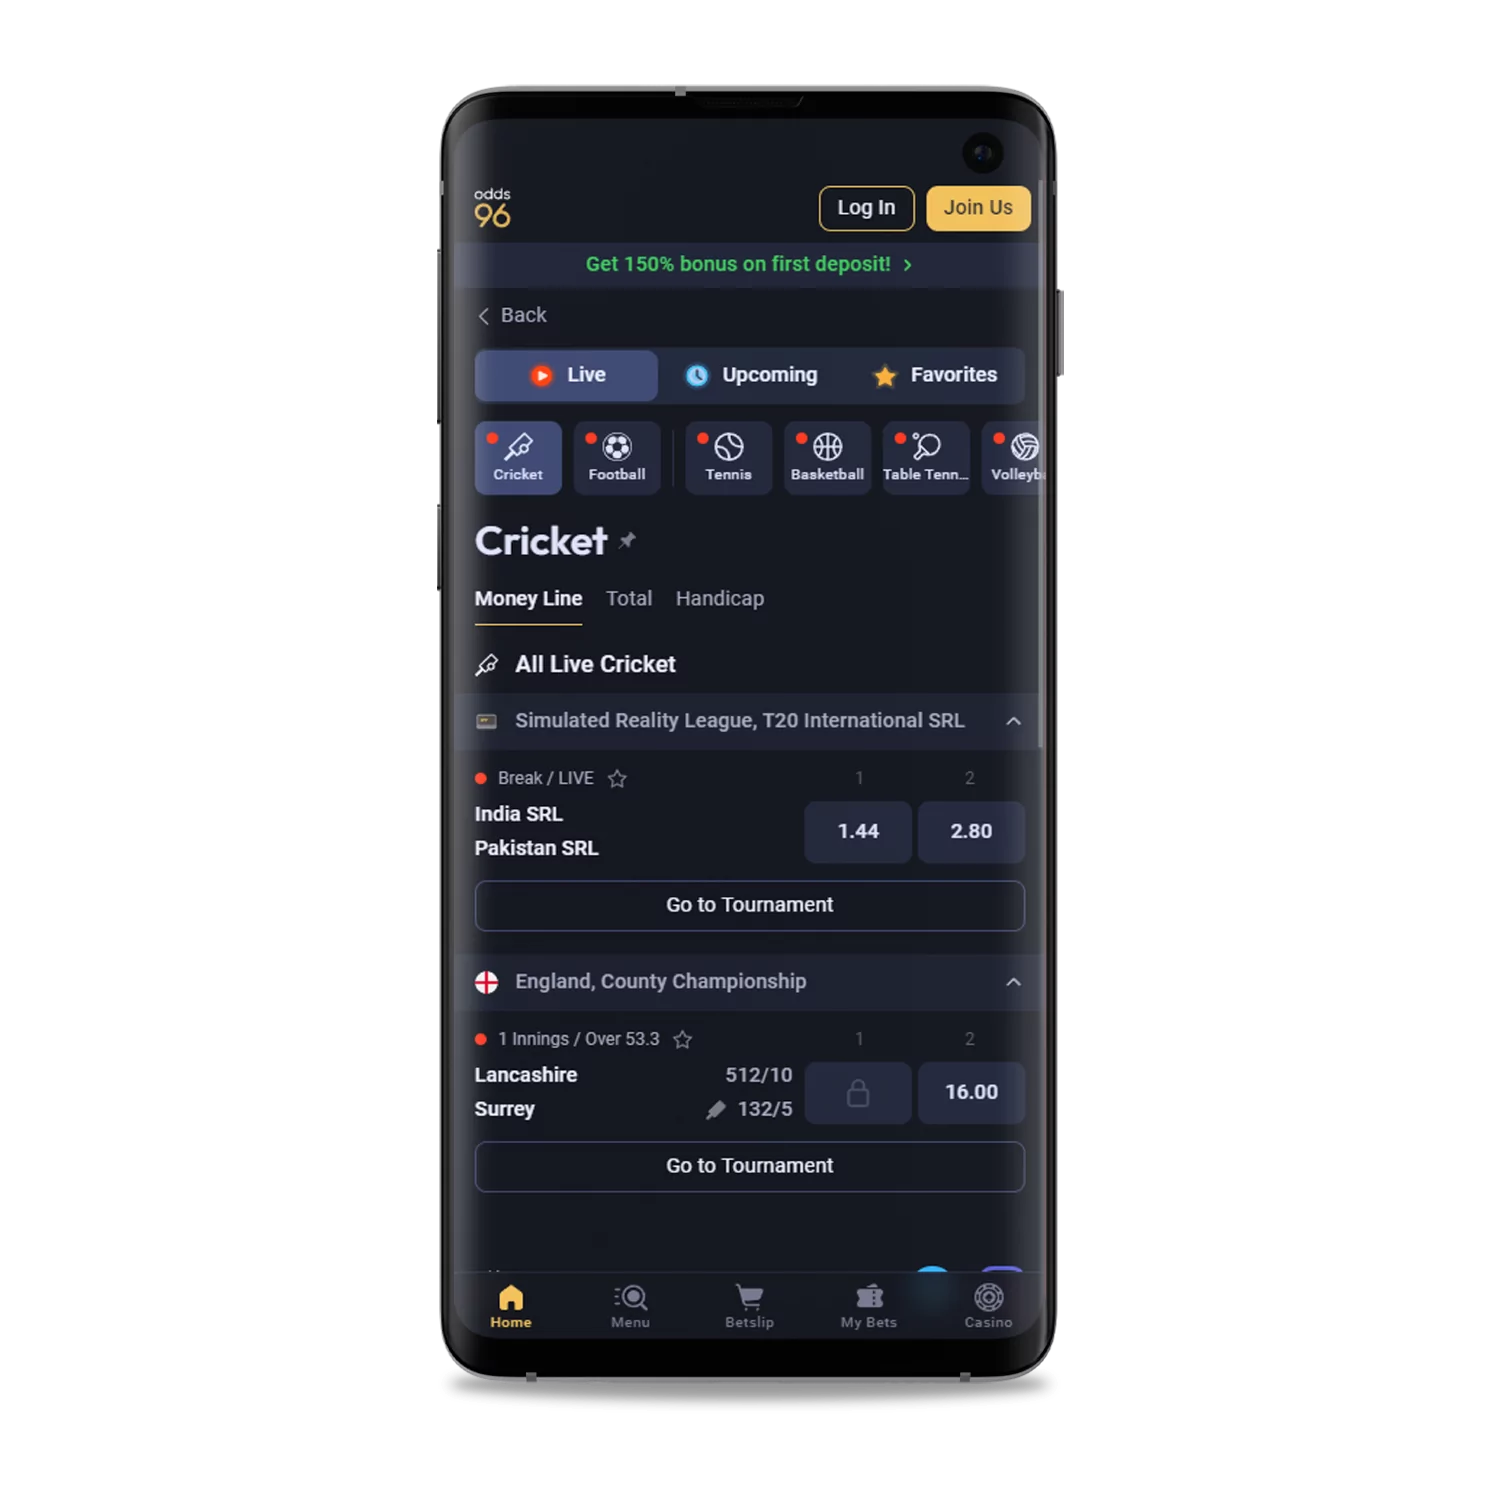 Find out about the functions and features of the Odds96 app.